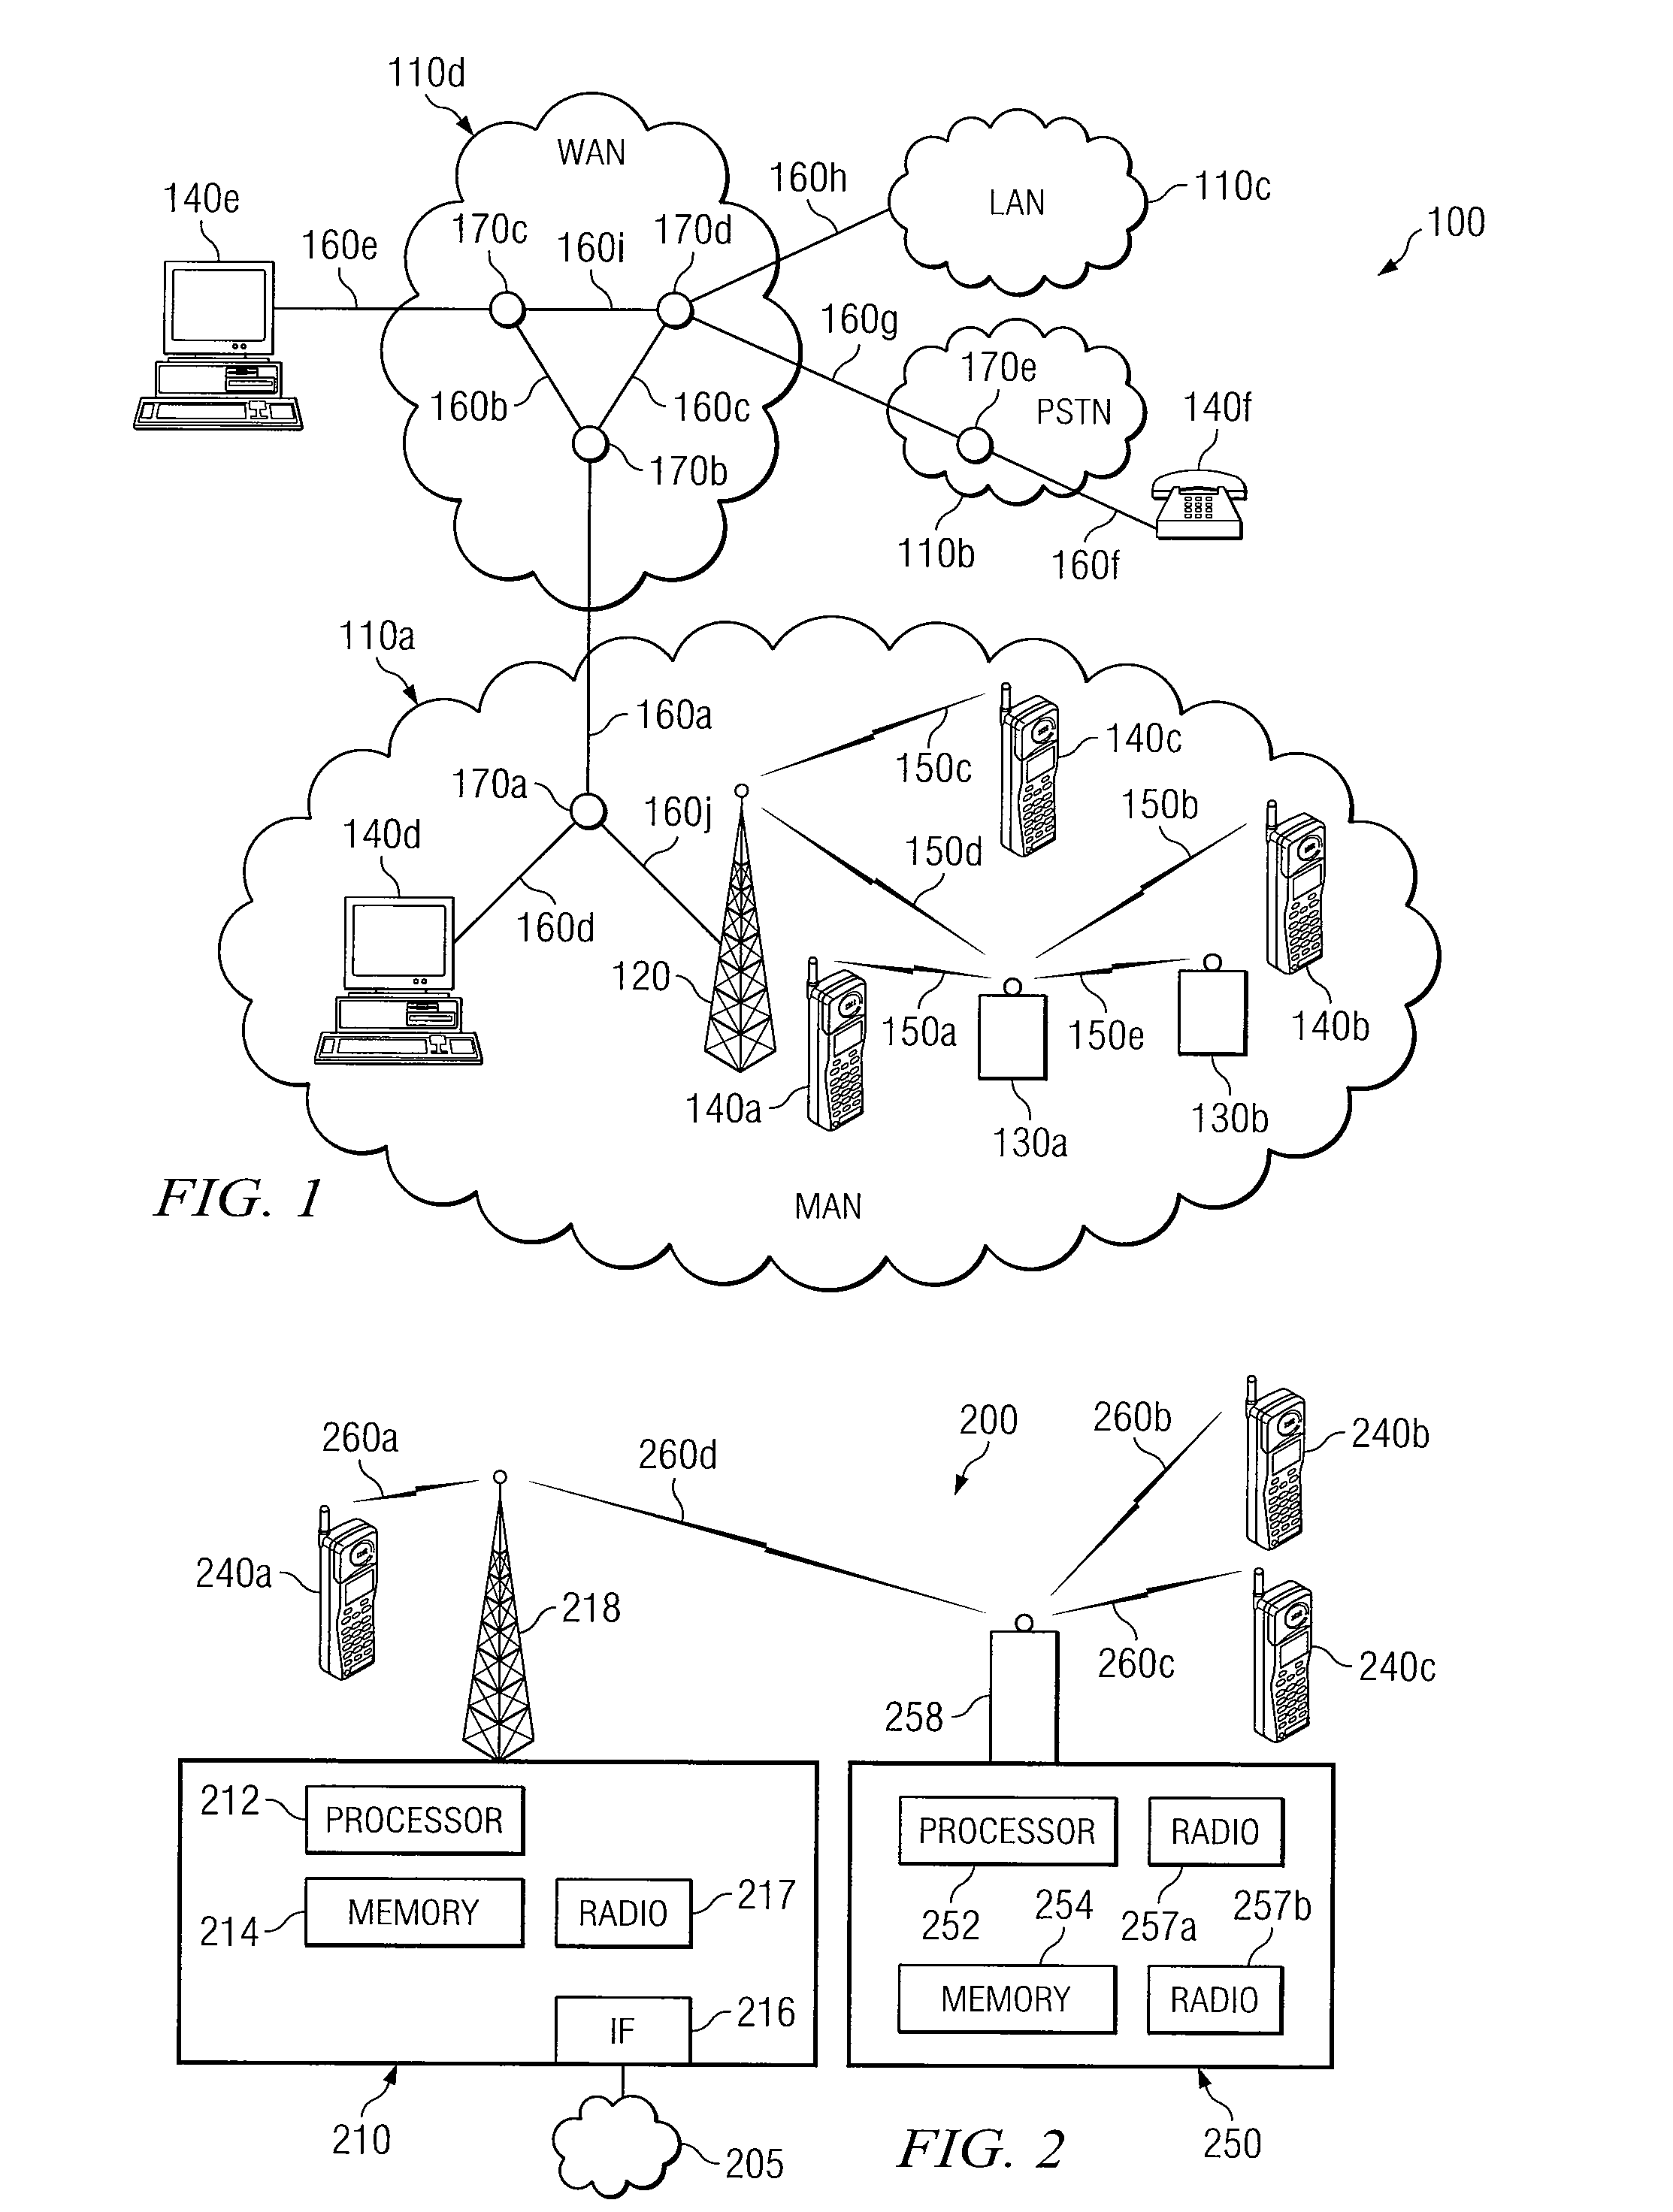 System and method for adjusting connection parameters in a wireless network